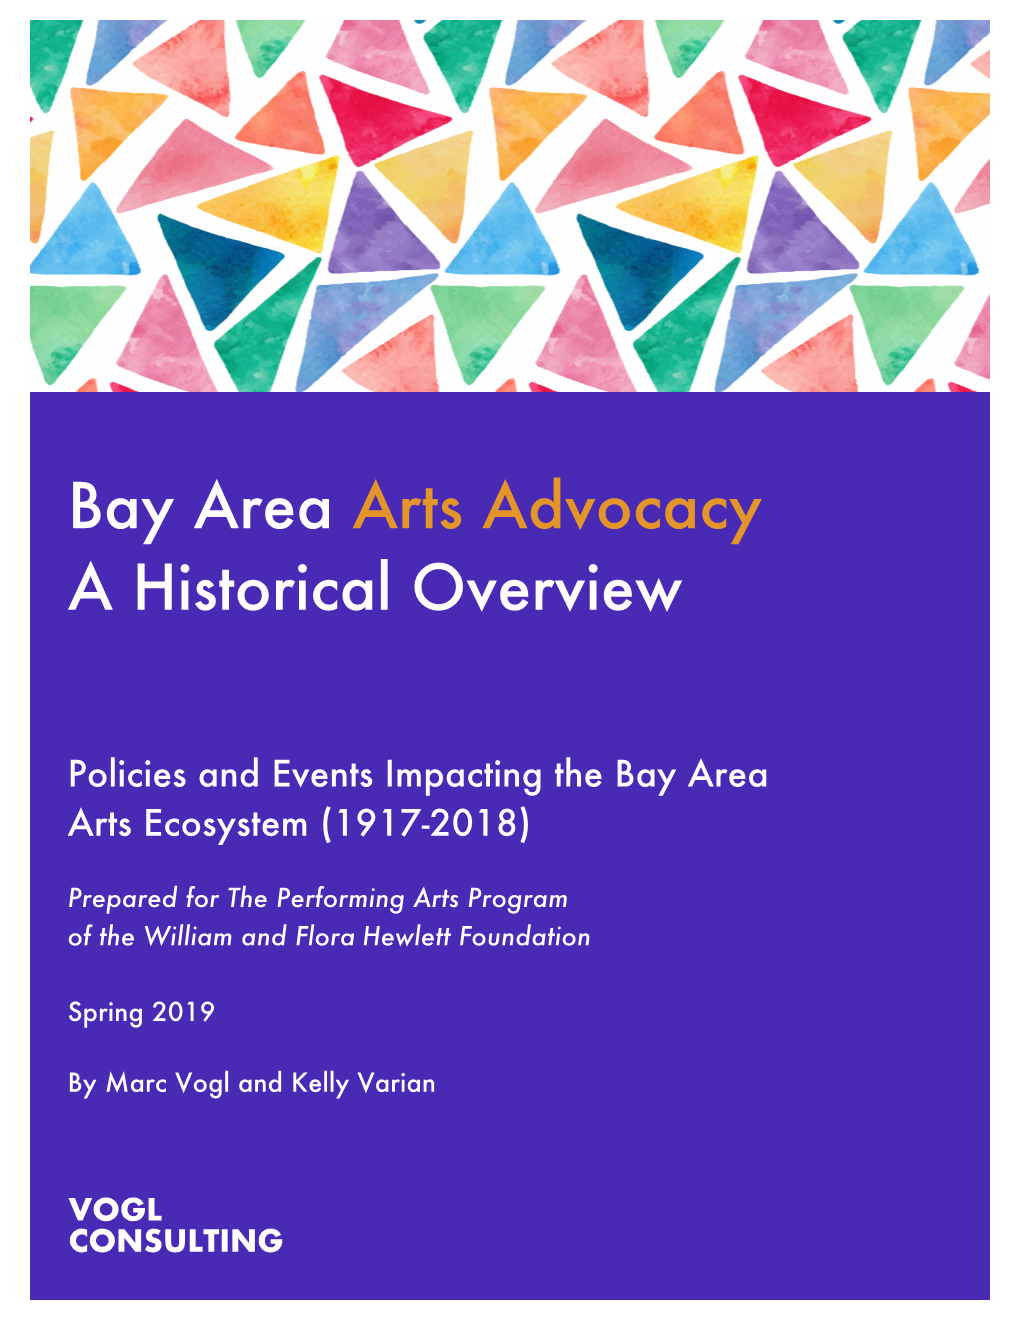 Bay Area Arts Advocacy a Historical Overview